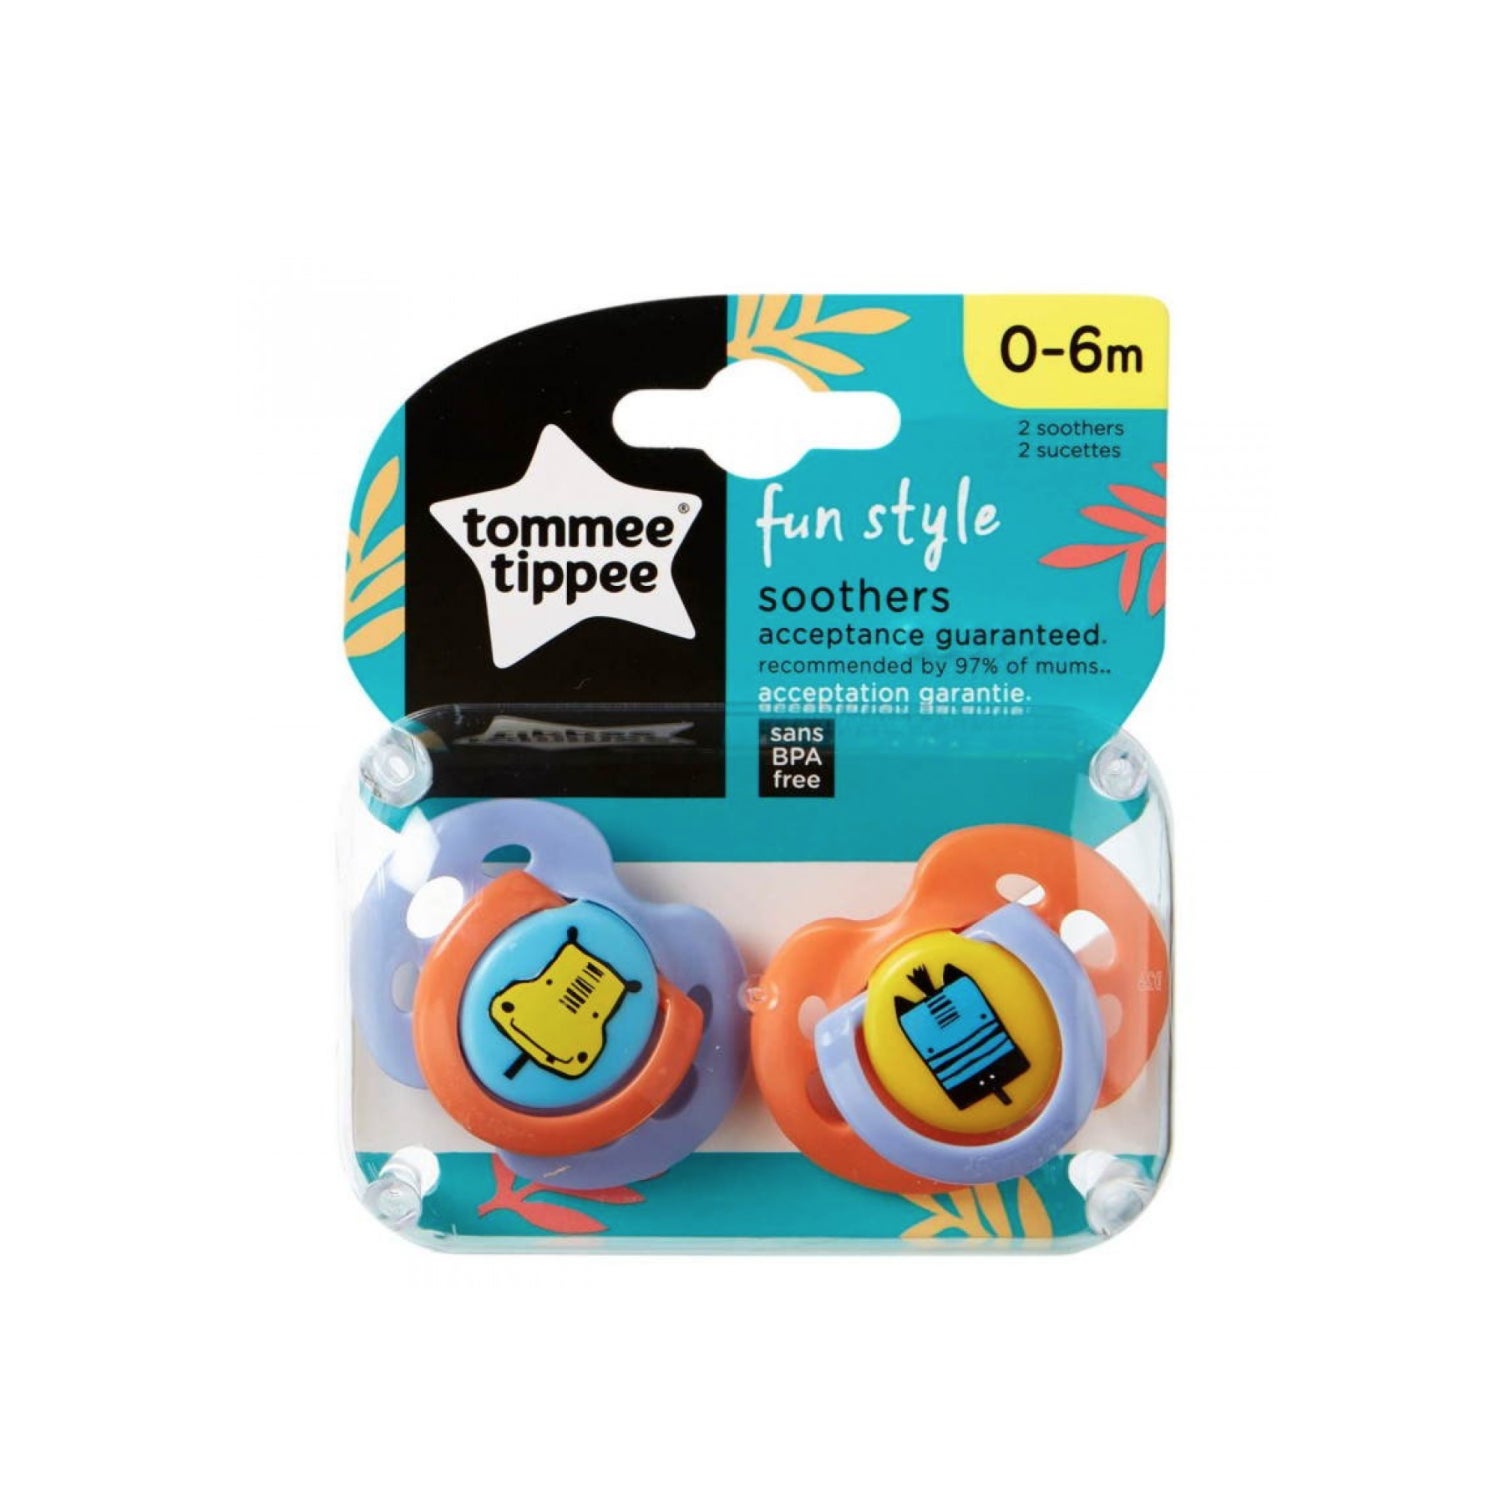 Chupetes Night Time (6-18 Meses) Tommee Tippee By Maternelle